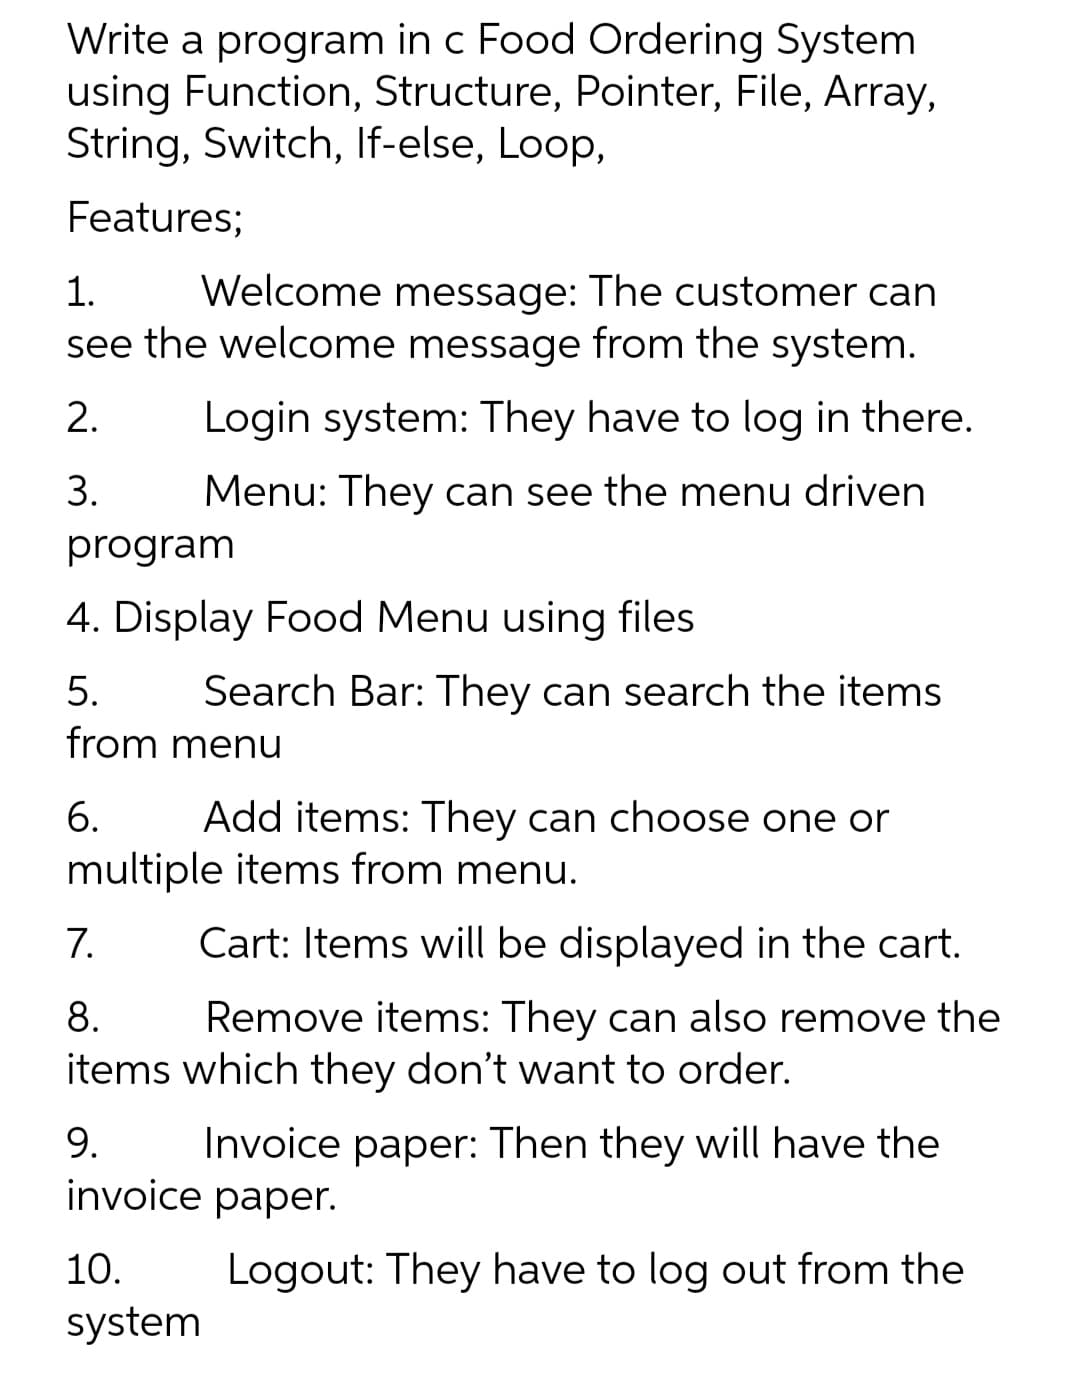 Write a program in c Food Ordering System
using Function, Structure, Pointer, File, Array,
String, Switch, If-else, Loop,
Features;
Welcome message: The customer can
see the welcome message from the system.
1.
2.
Login system: They have to log in there.
3.
Menu: They can see the menu driven
program
4. Display Food Menu using files
5.
Search Bar: They can search the items
from menu
6.
Add items: They can choose one or
multiple items from menu.
7.
Cart: Items will be displayed in the cart.
8.
Remove items: They can also remove the
items which they don't want to order.
9.
Invoice paper: Then they will have the
invoice paper.
10.
Logout: They have to log out from the
system
